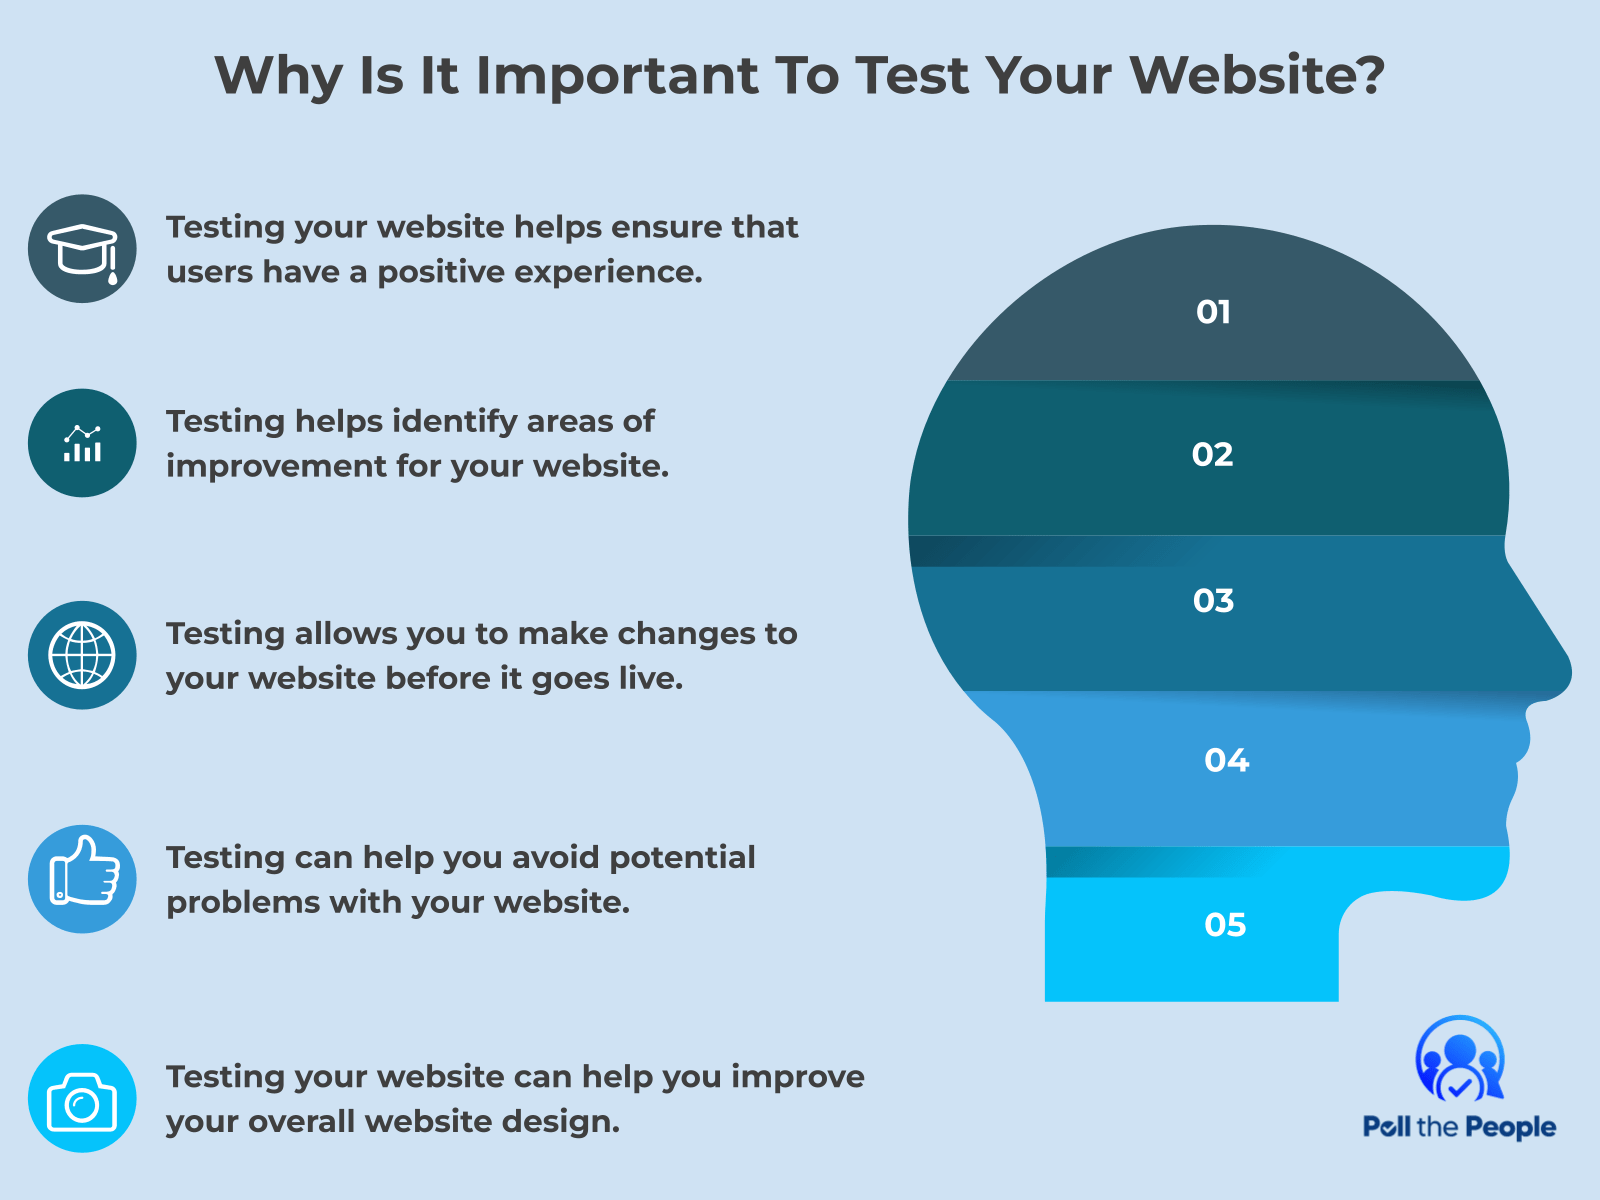 INFOGRAPHIC: Why is it important to test your website? - Poll the People